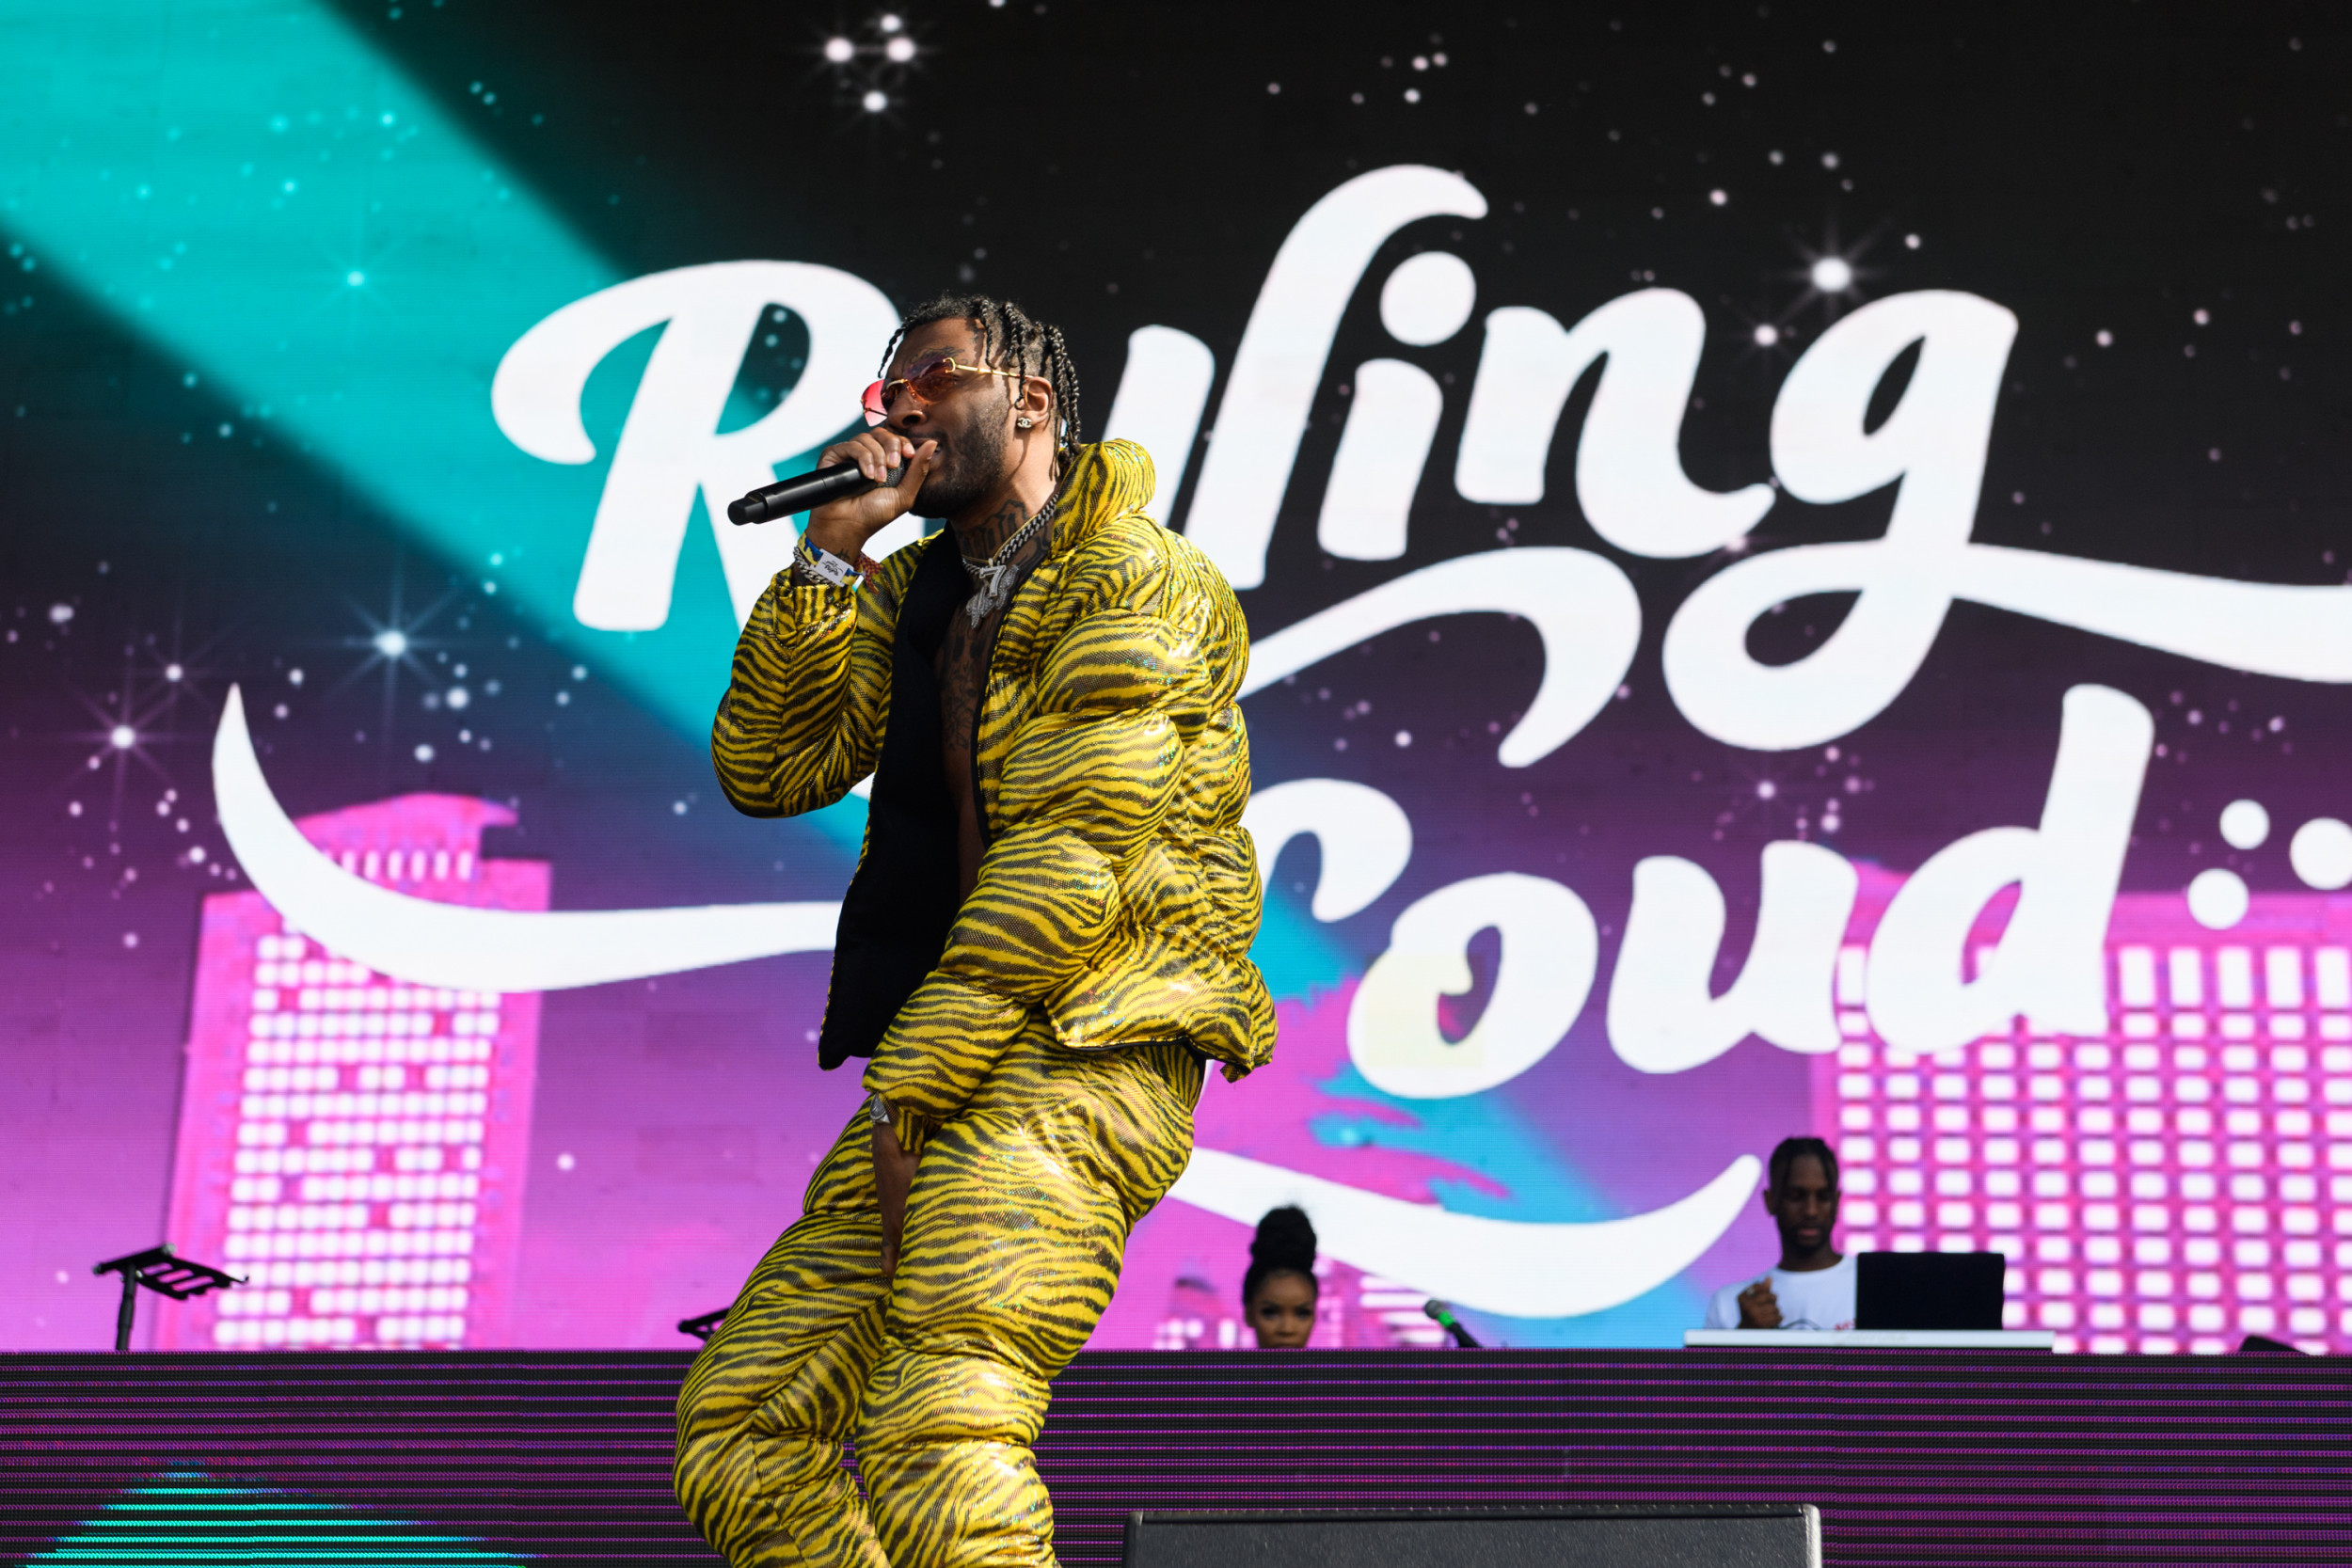 Rolling Loud Miami 2020 Lineup Price How To Buy Tickets And What Is Included In Vip Packages